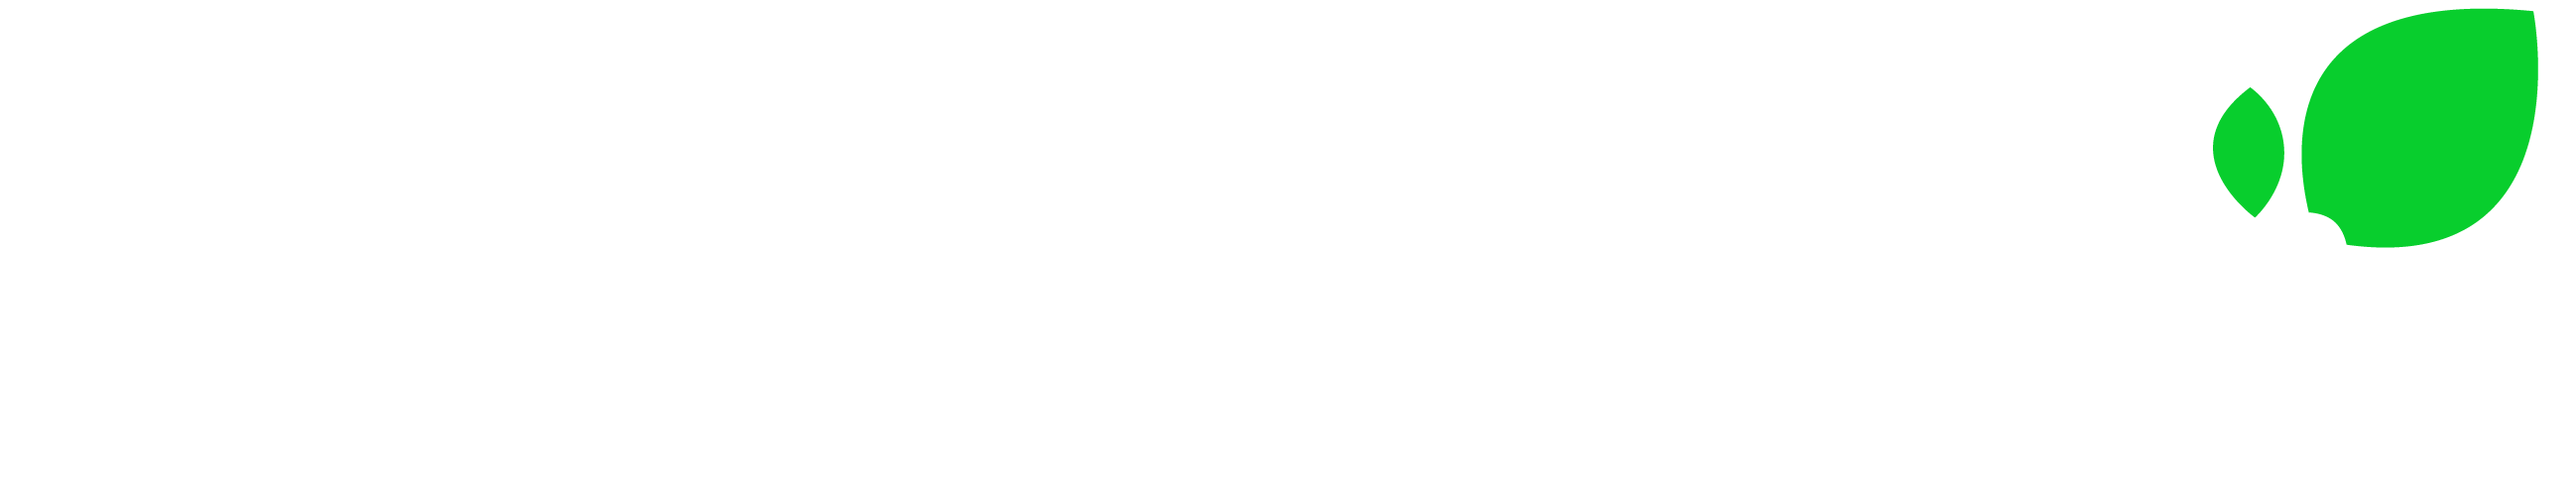 We Are Free From Logo